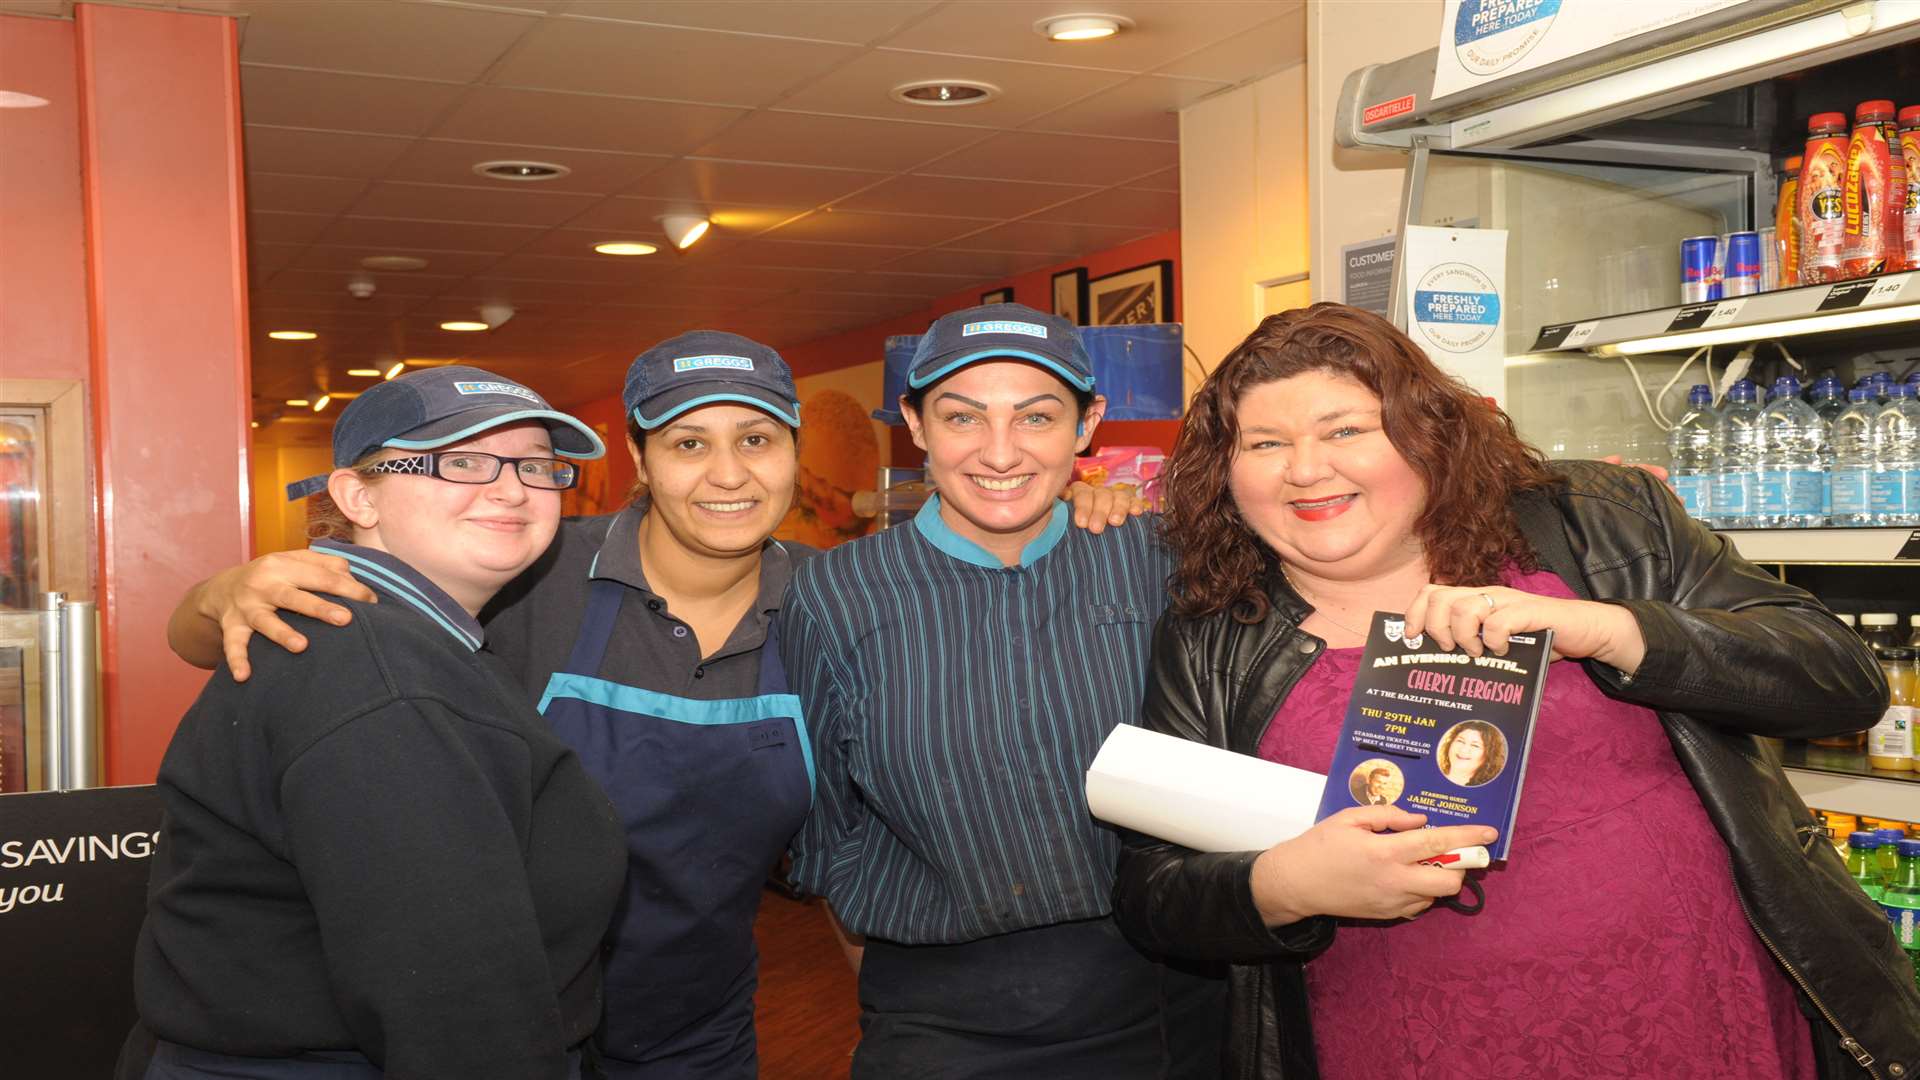 Cheryl with the girls from Greggs: Nicola Rooke, Awatet Wady and Rachel Banks